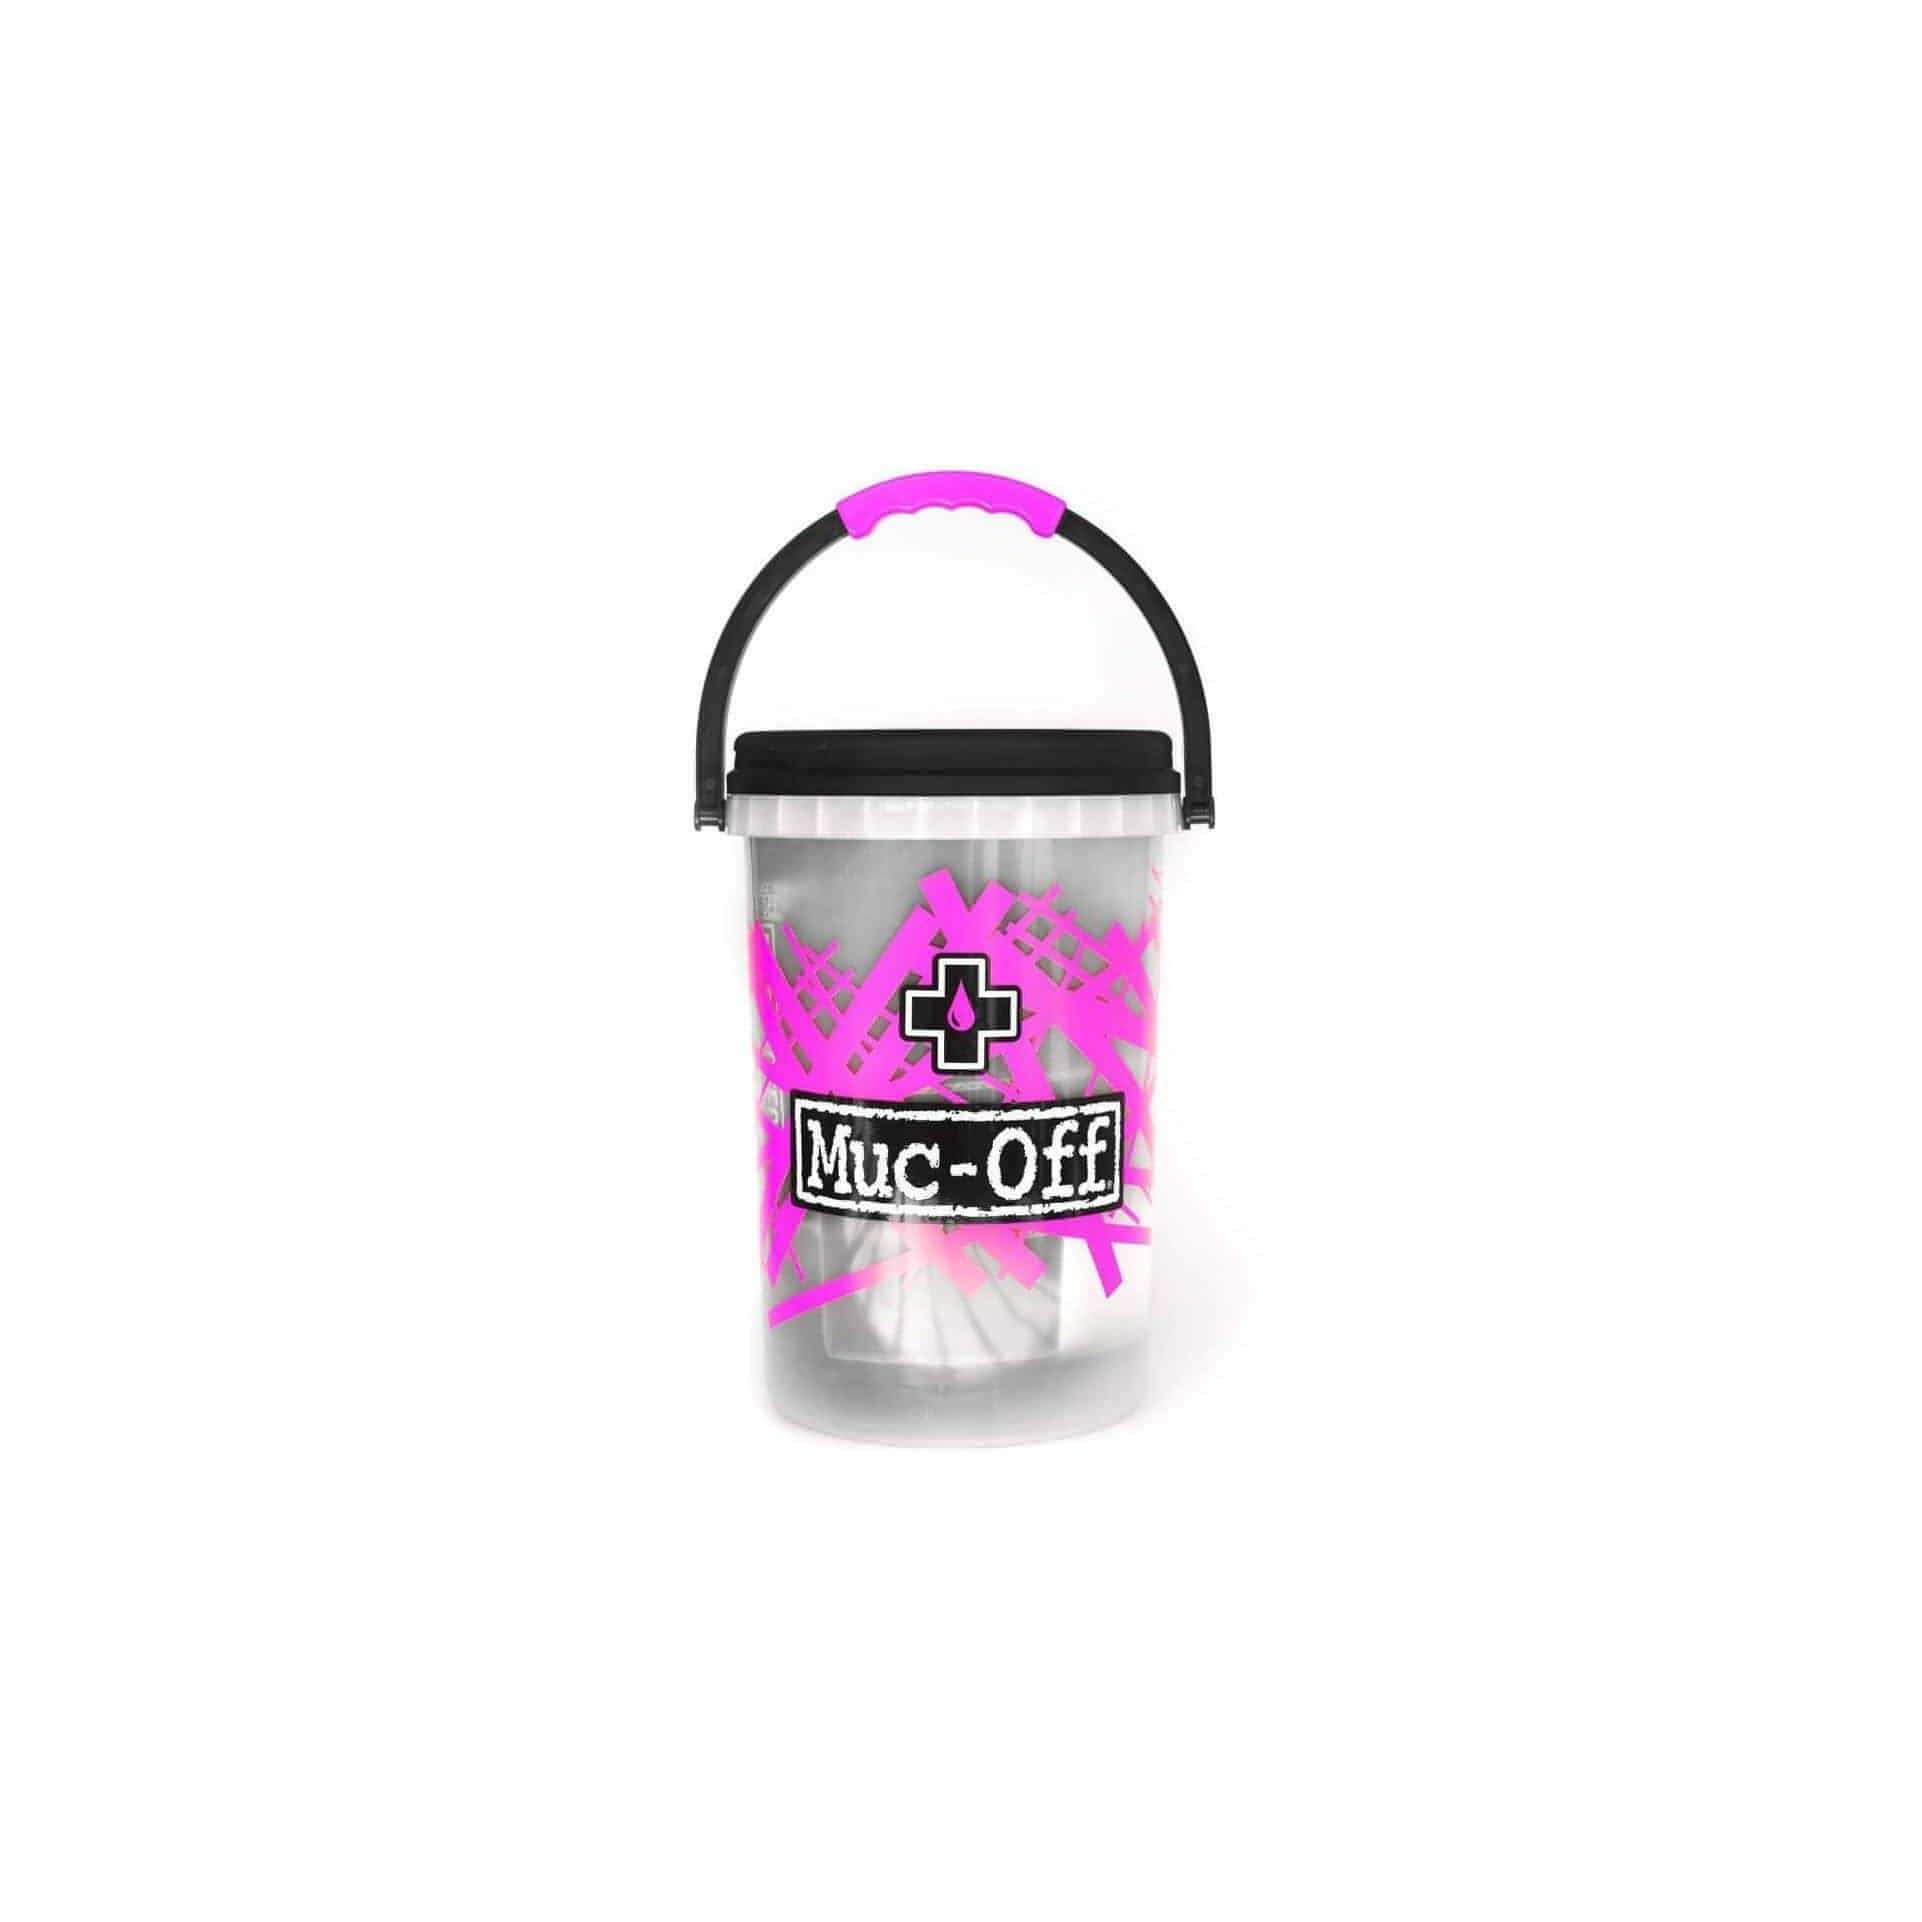 Muc-Off Dirt Bucket With Filth Filter 5037835999006 - Start Fitness